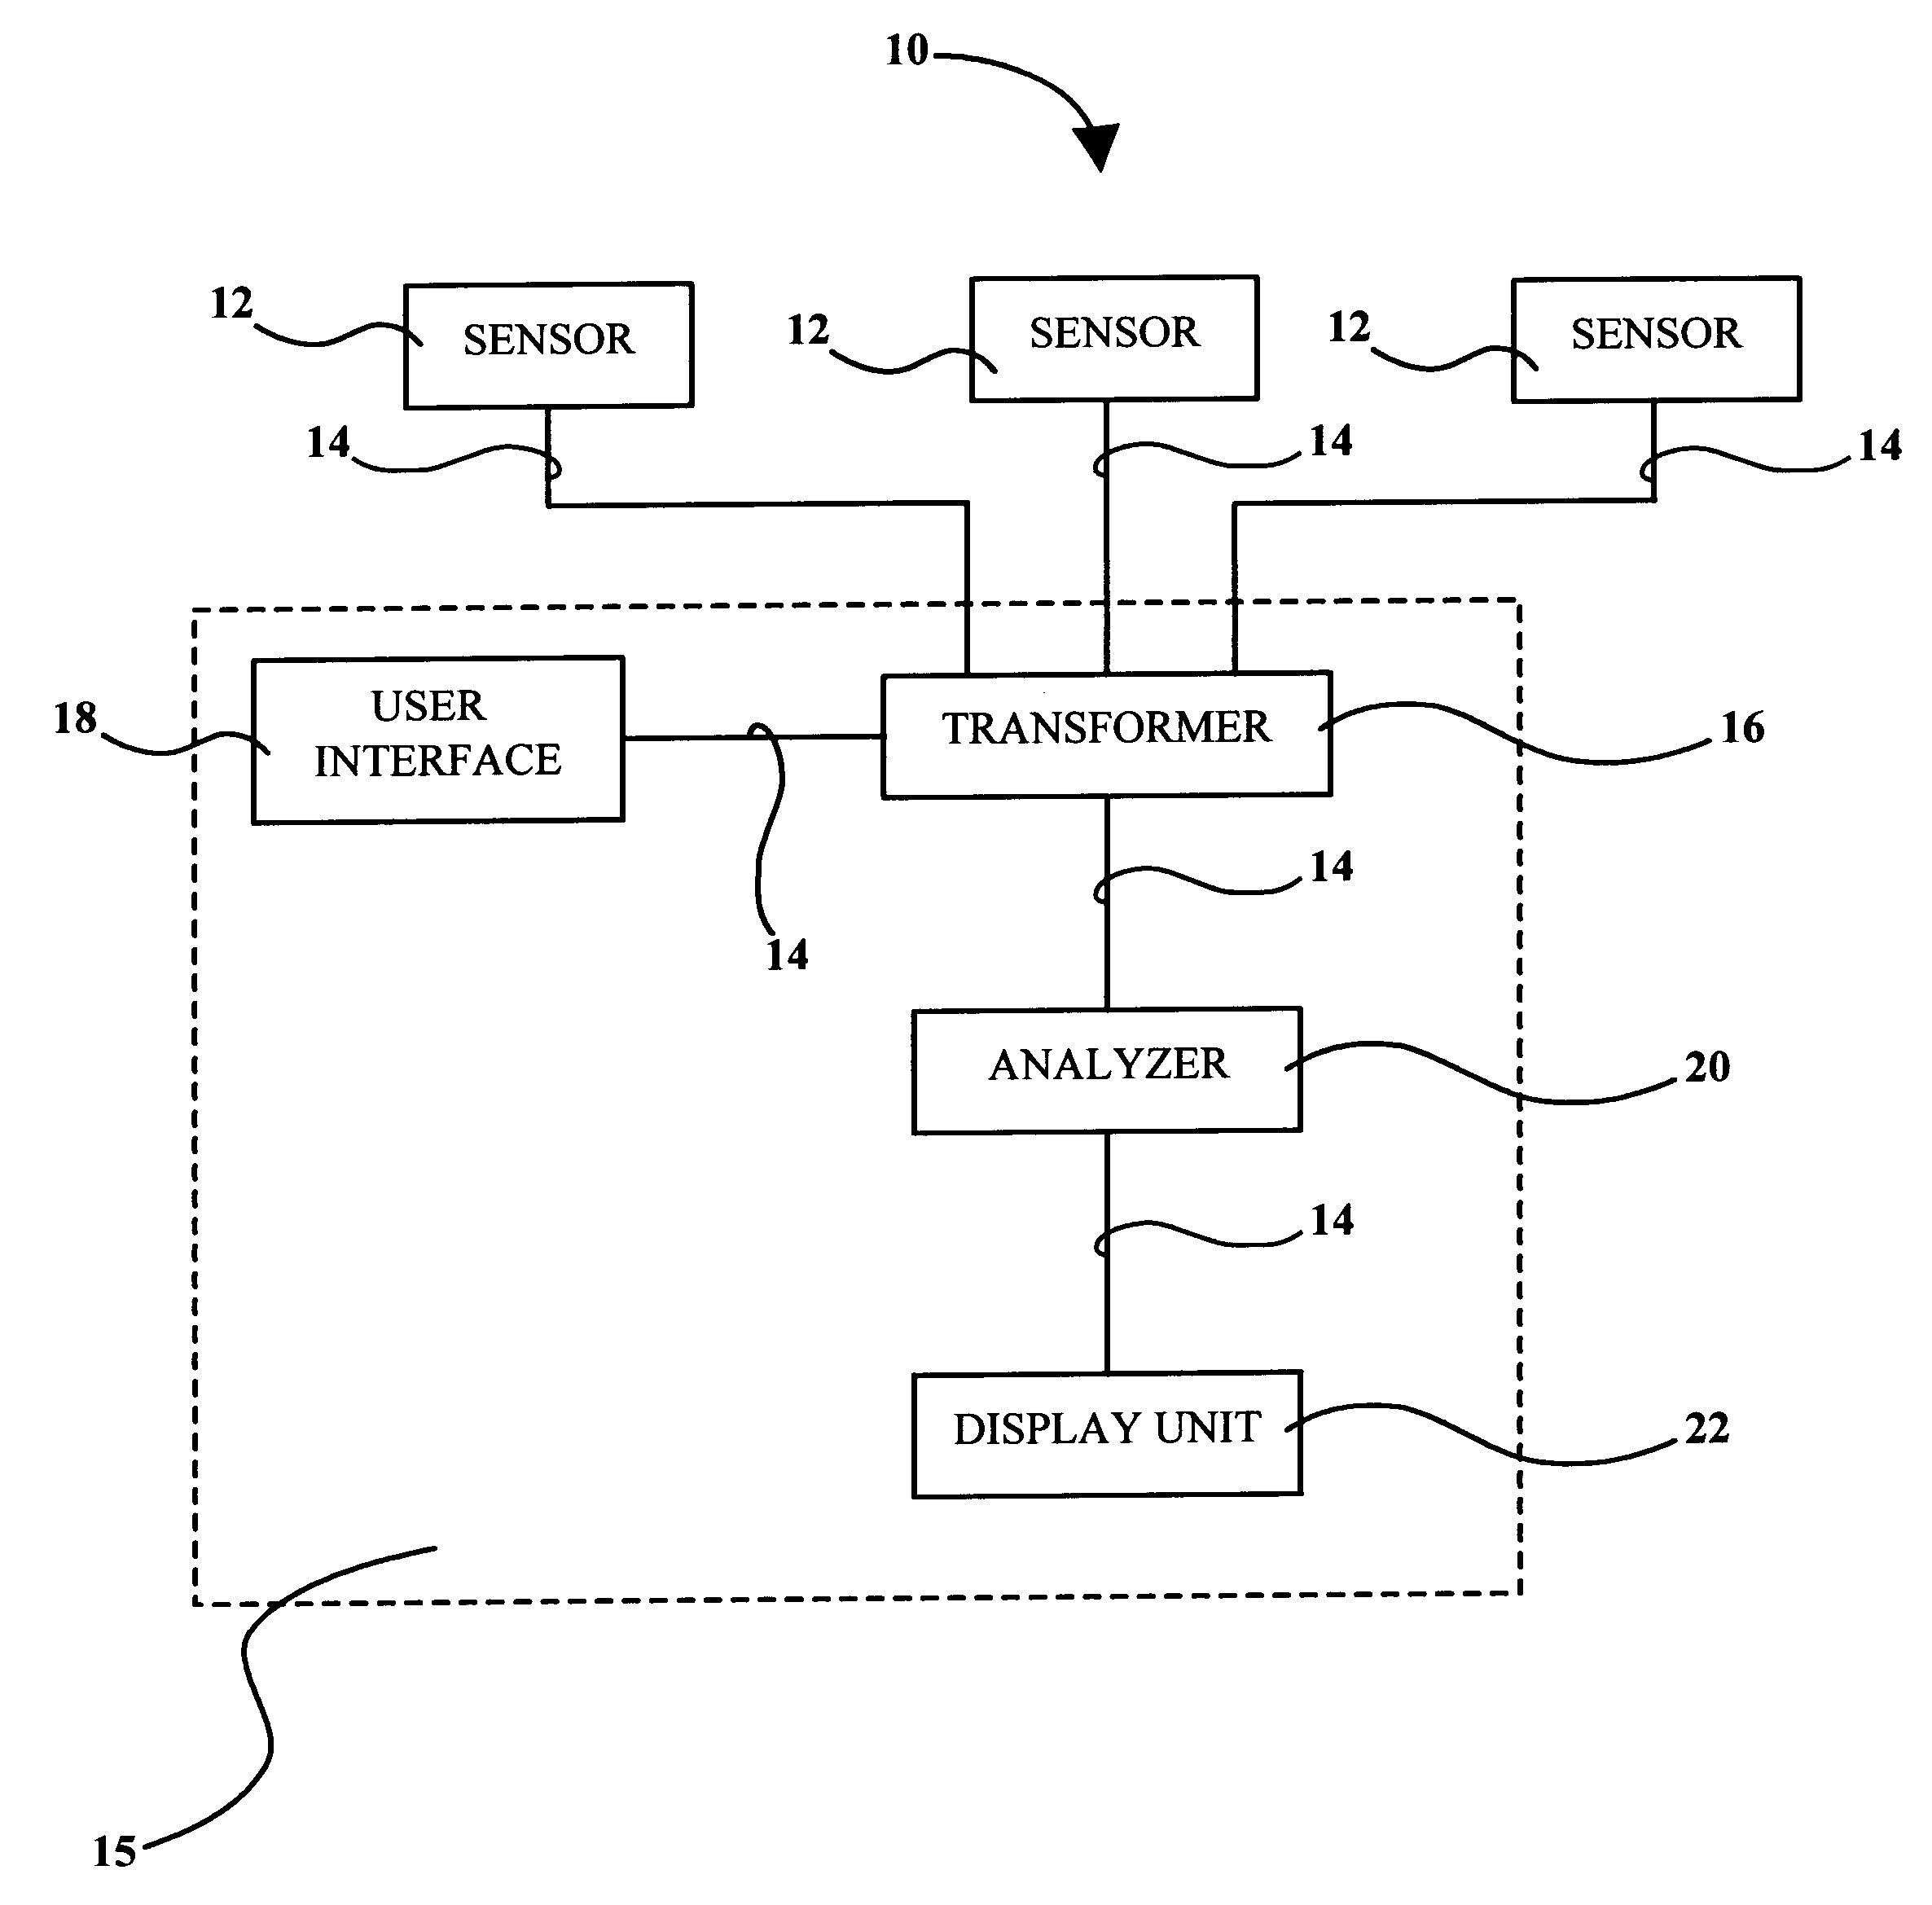 Apparatus and method for monitoring a system and displaying the status of the system